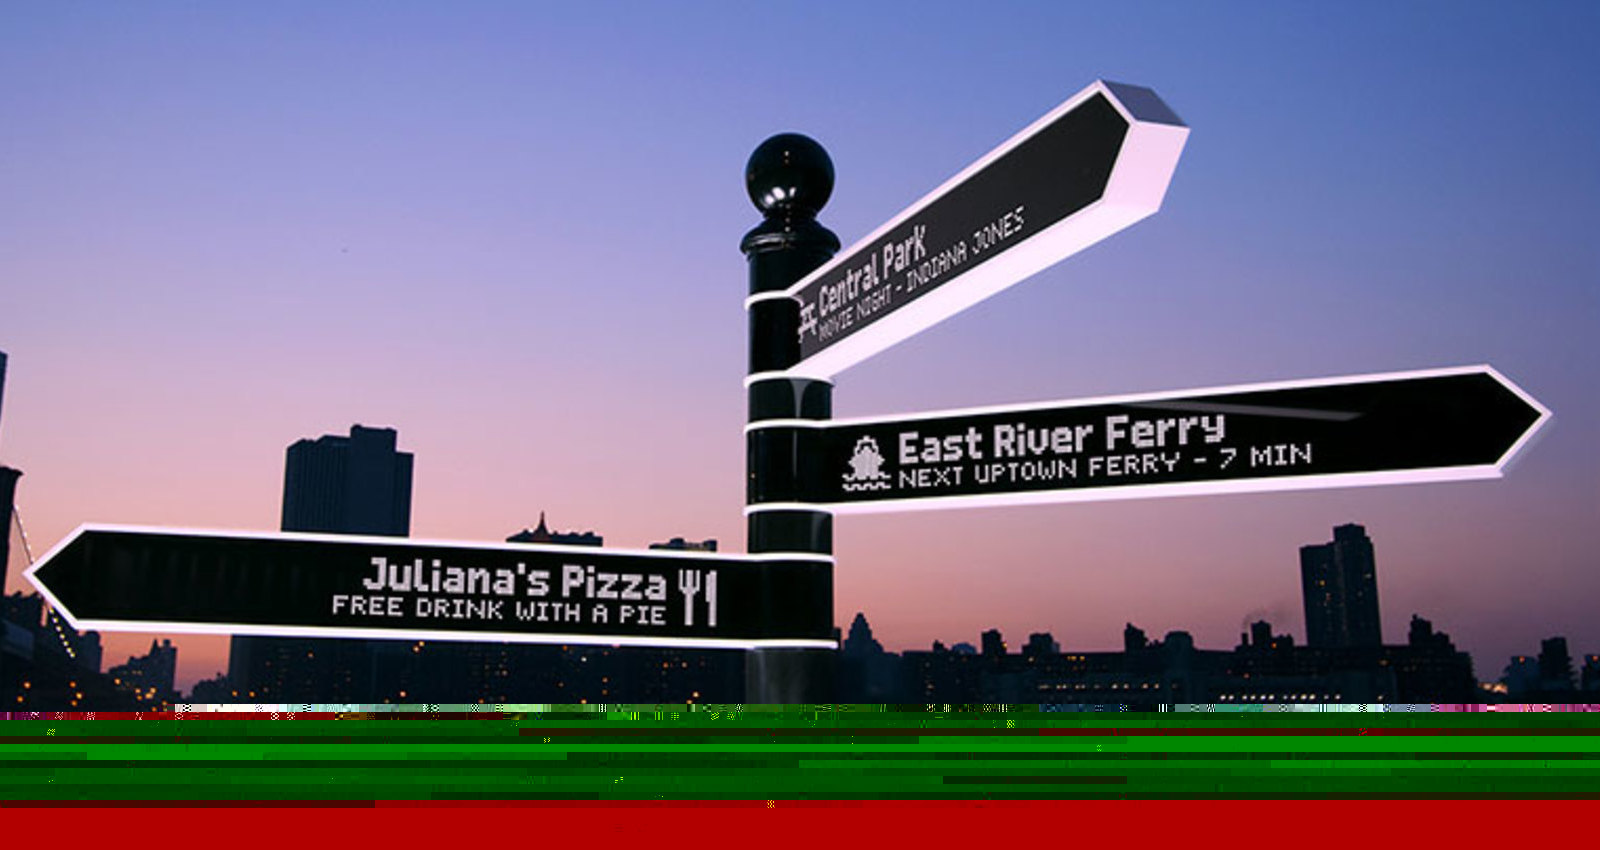 Points - The most advanced directional sign on Earth